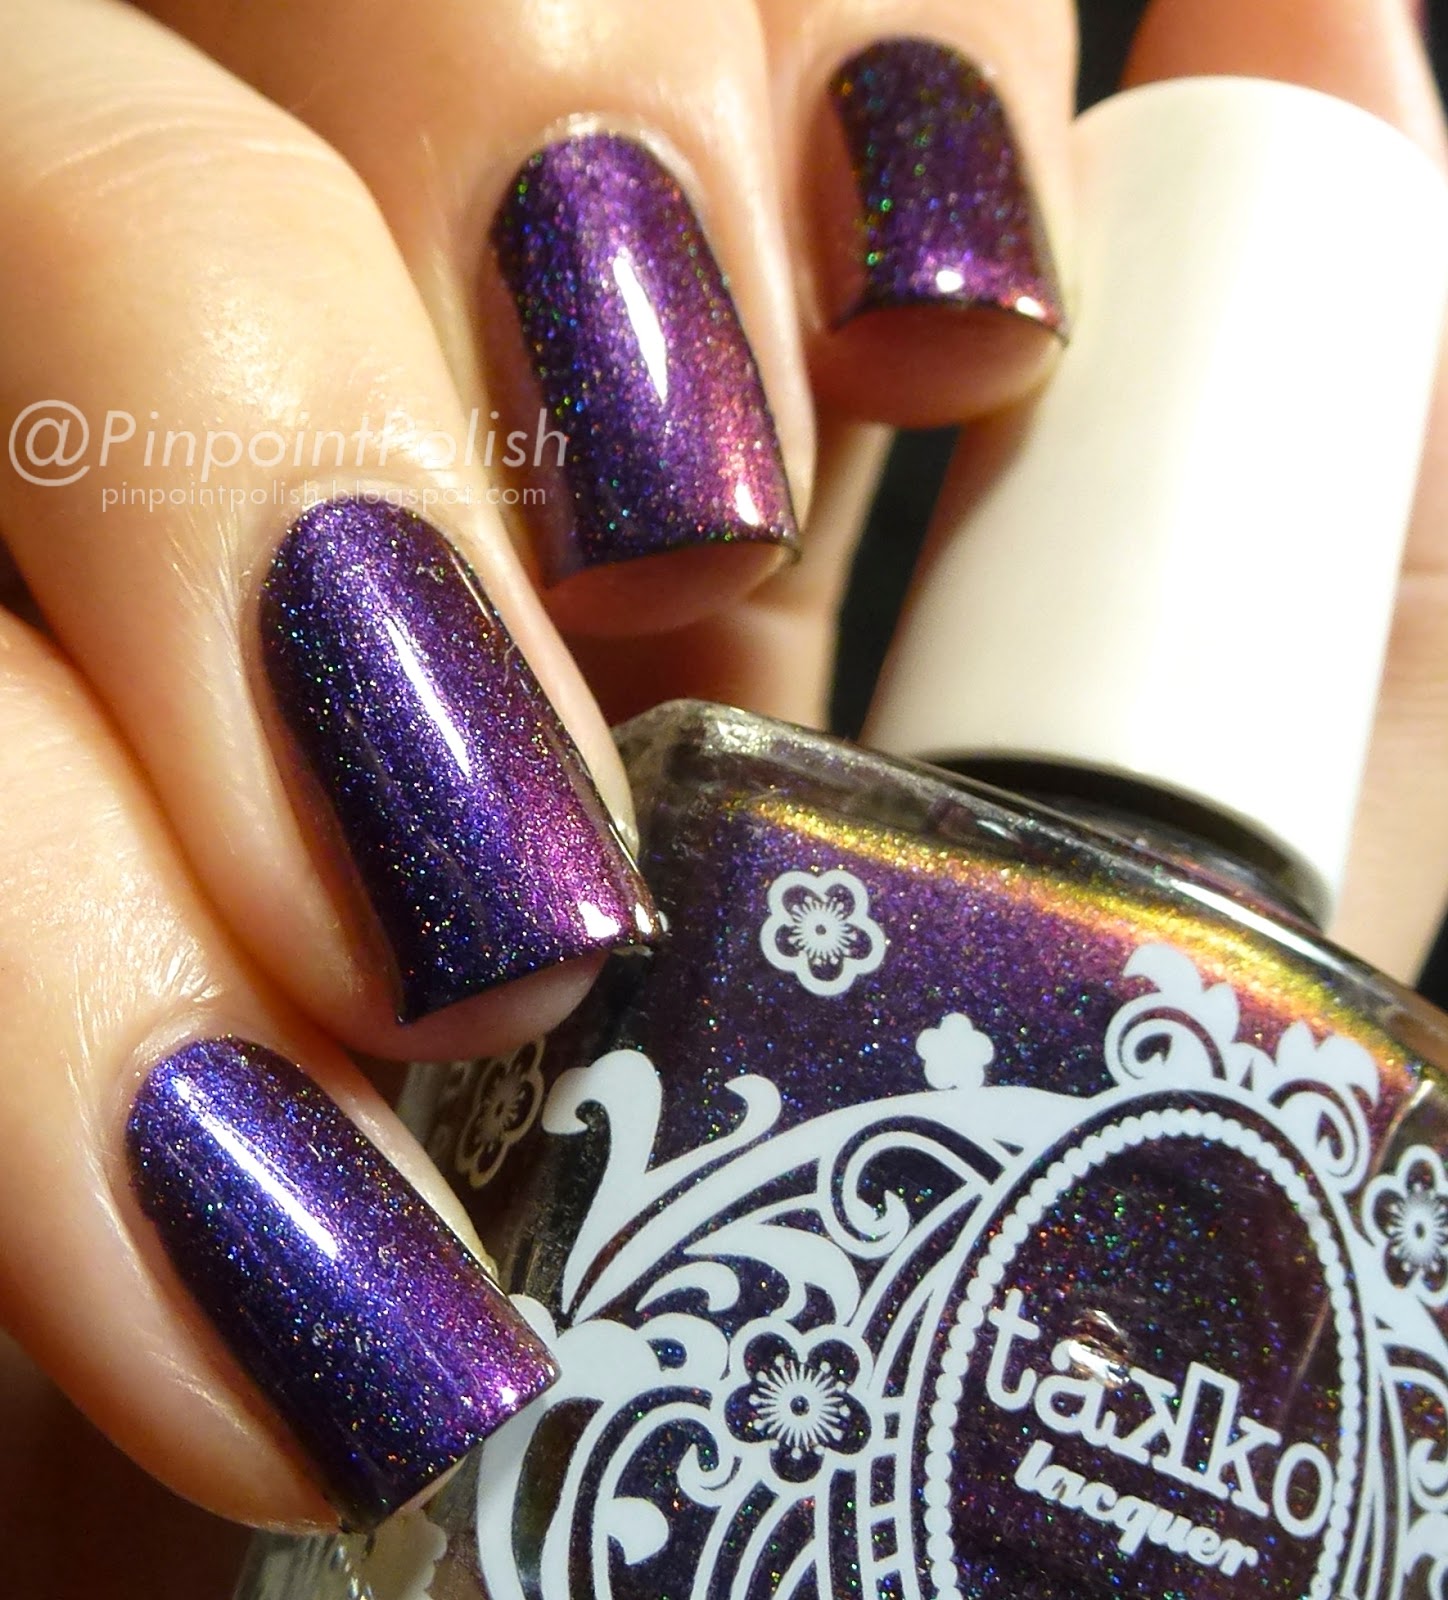 Dazed and confused, takko lacquer, swatch